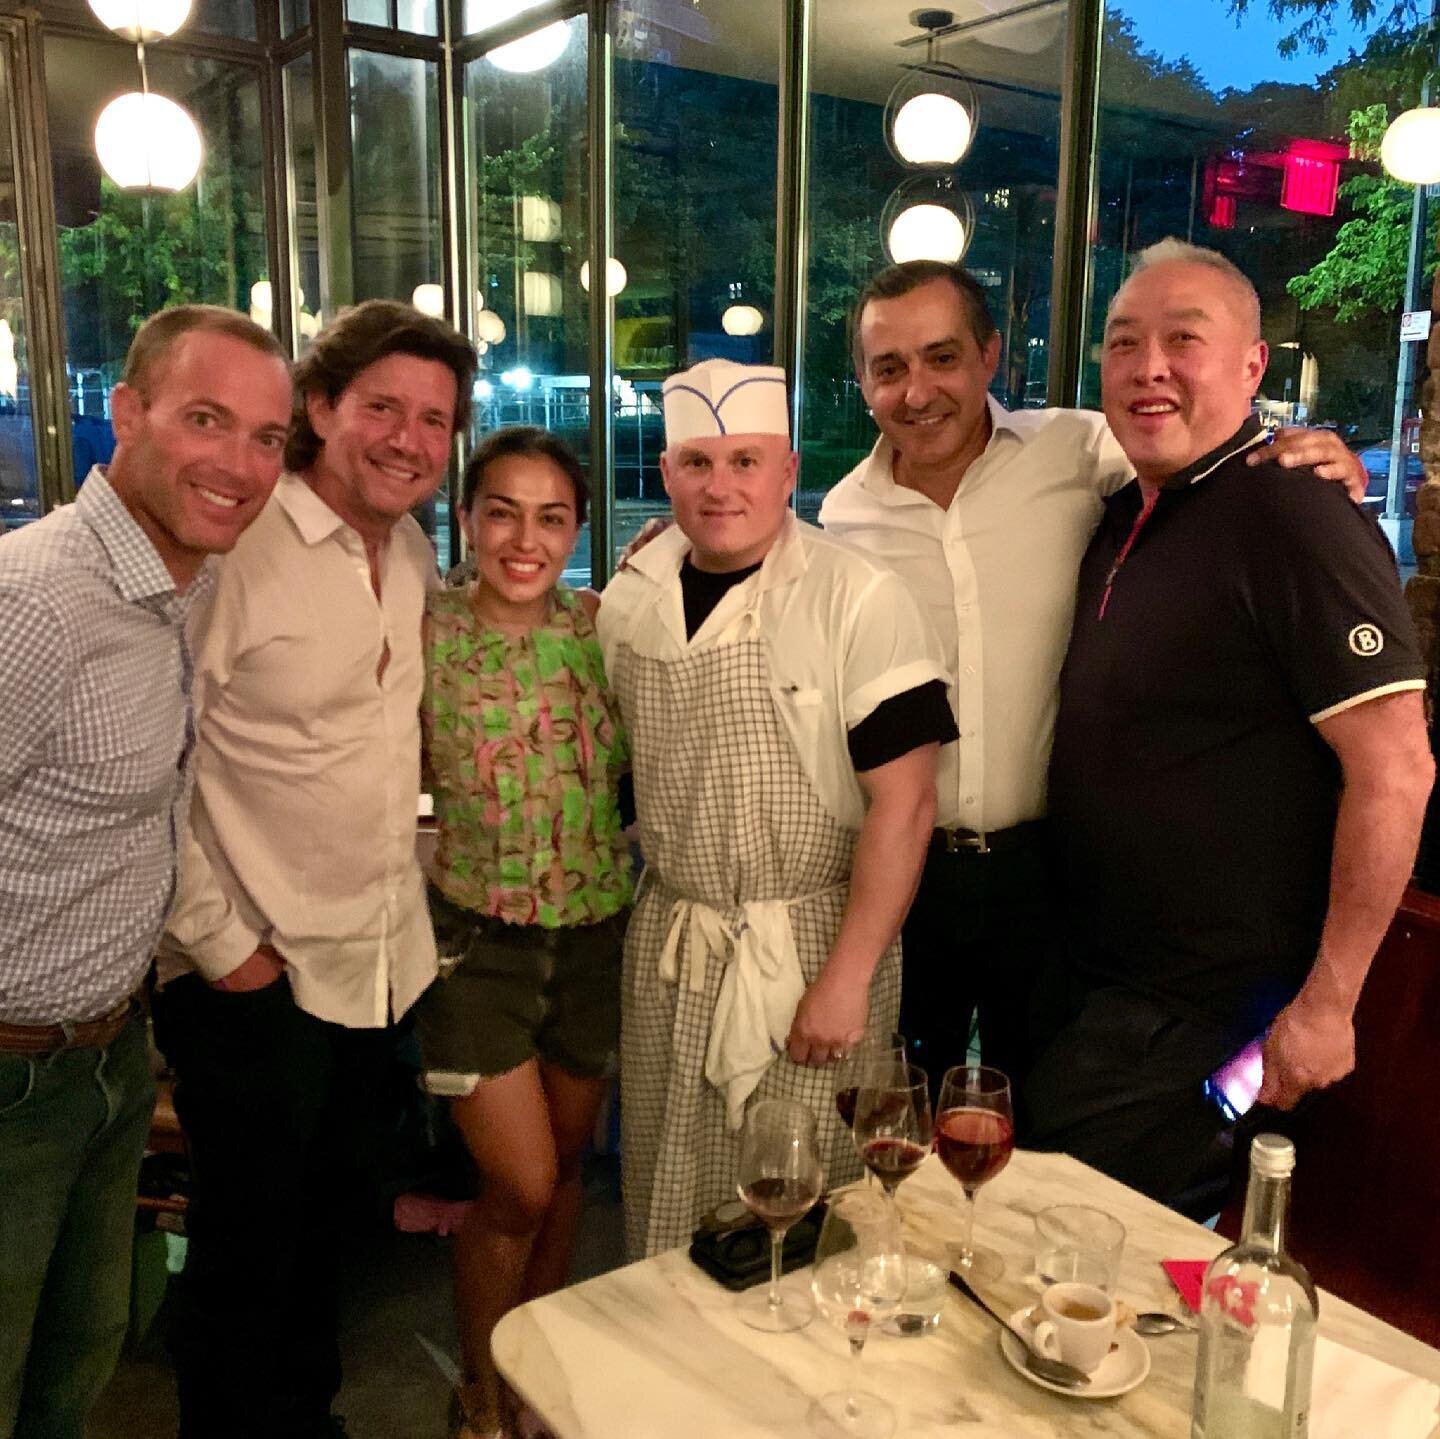 Thank you Chef Ryan @dibartolo and @alexandraniakani for an amazing dining experience. #basquecuisine And thank you for letting us bring some wines #spanishwines that were appropriate for such a special meal. (Swipe left). Your wine list is very spec